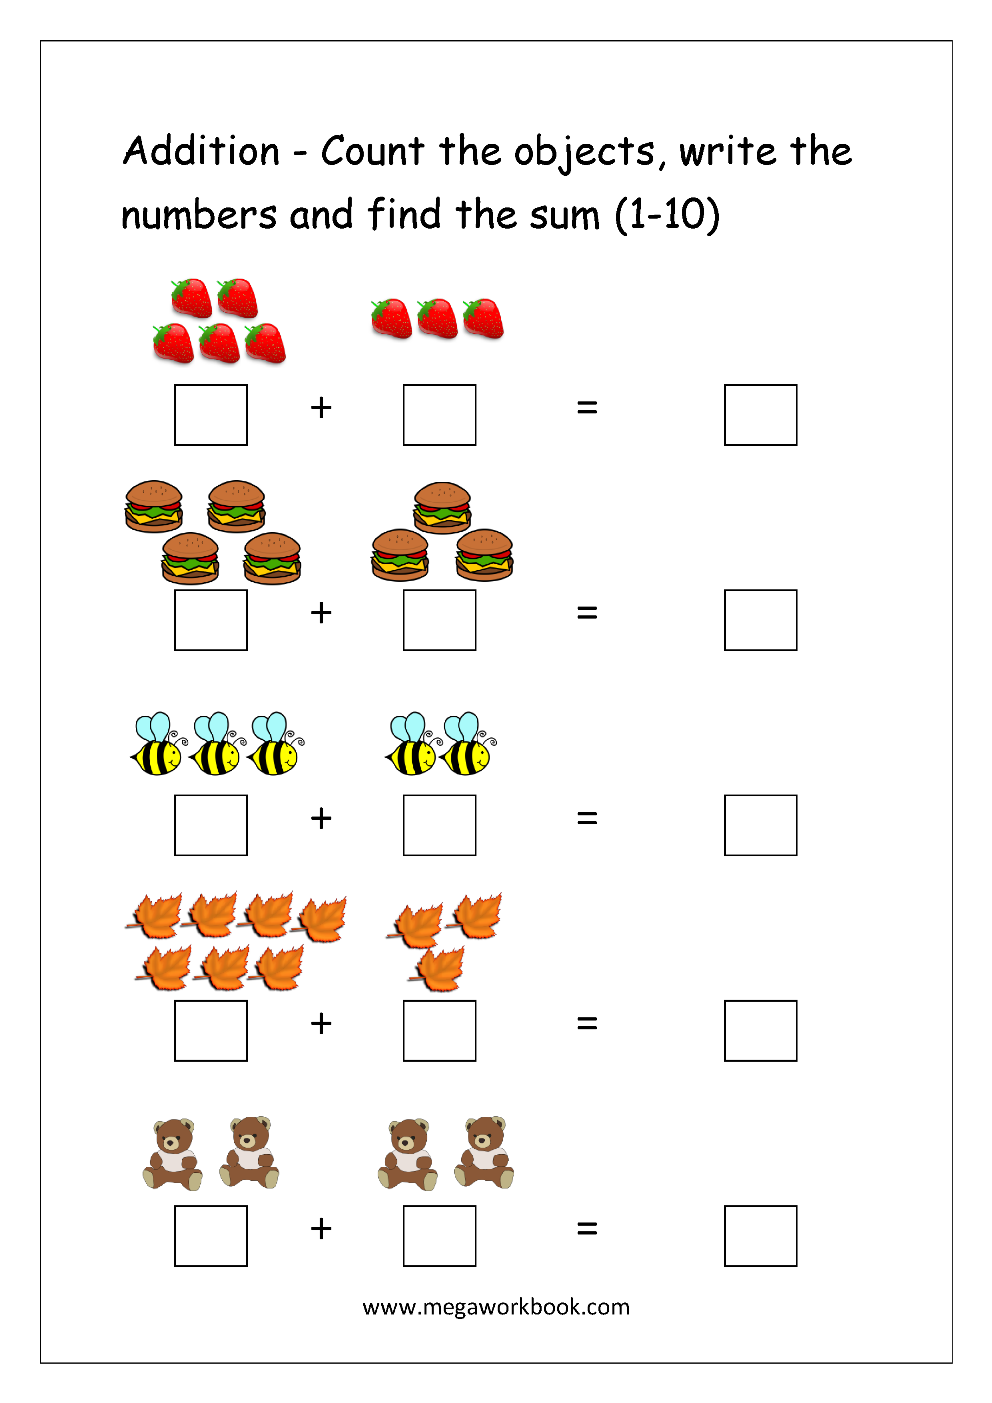 free printable number addition worksheets 1 10 for kindergarten and grade 1 addition on number line addition with pictures objects megaworkbook